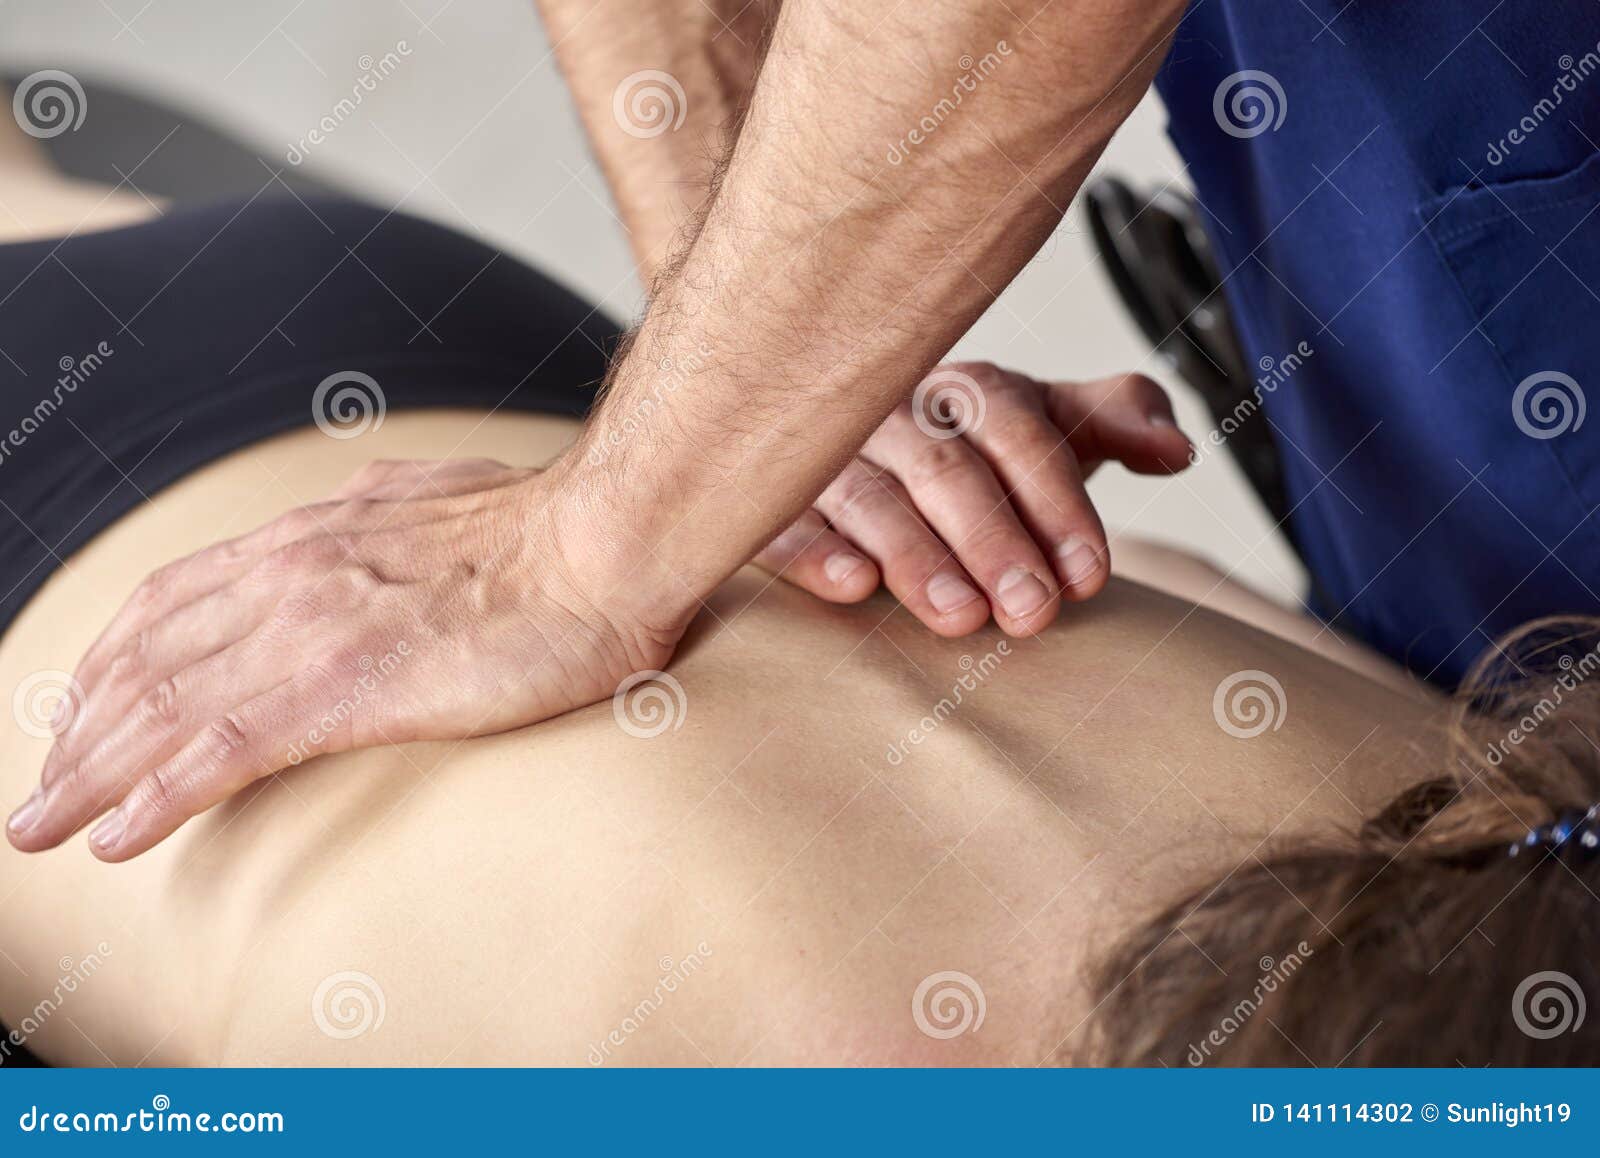 young woman having chiropractic back adjustment. physiotherapy, sports injury rehabilitation. osteopathy, alternative medicine,